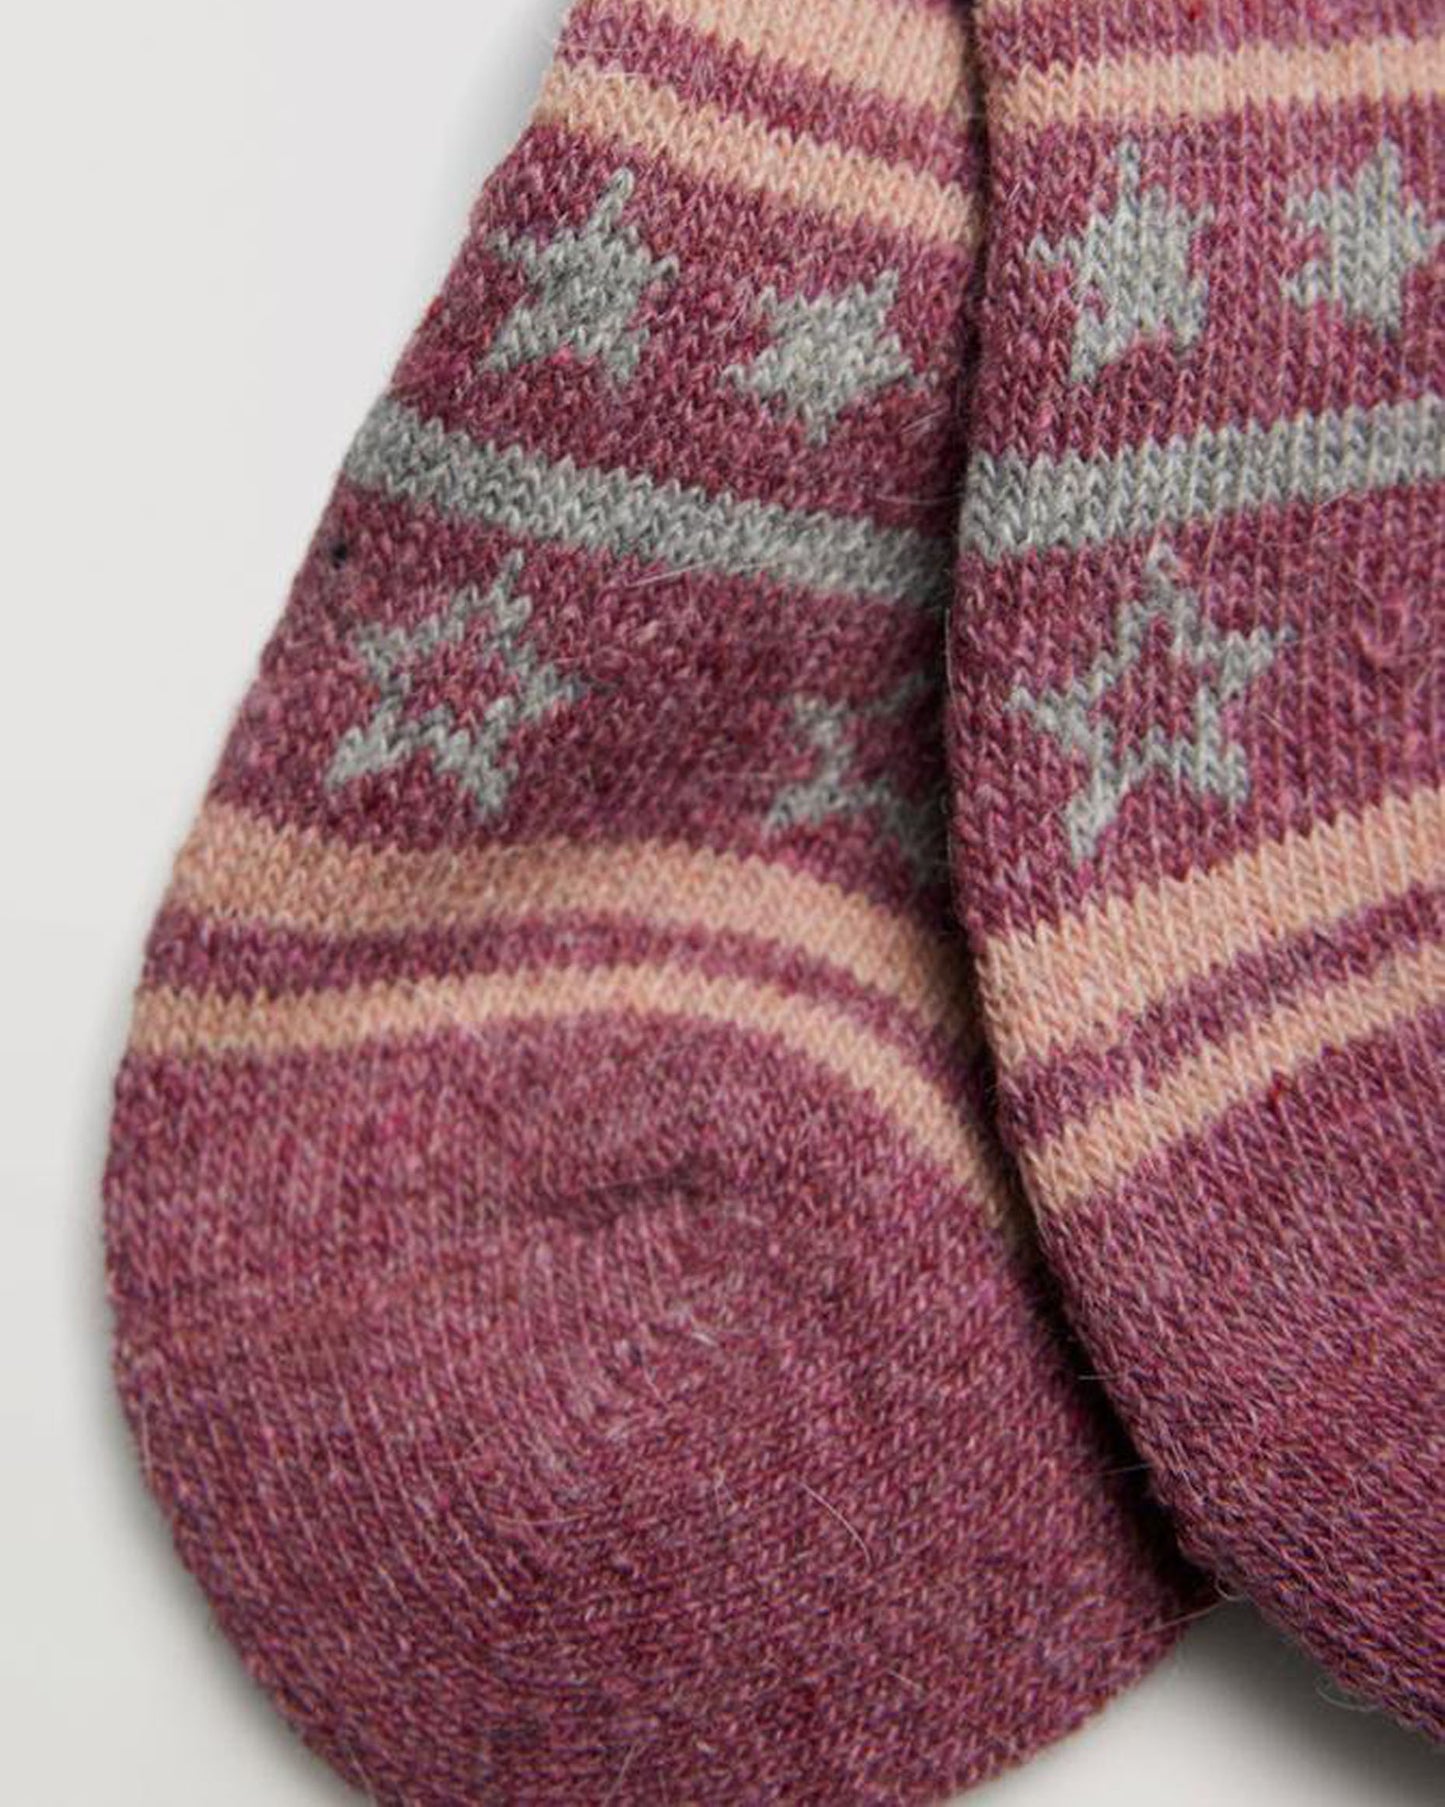 Ysabel Mora 12889 Stars & Stripes Angora Socks - Light wine coloured warm wool and angora mix thermal socks with a horizontal stripe and stars pattern in pale pink and light grey, shaped heel and deep elasticated comfort top.